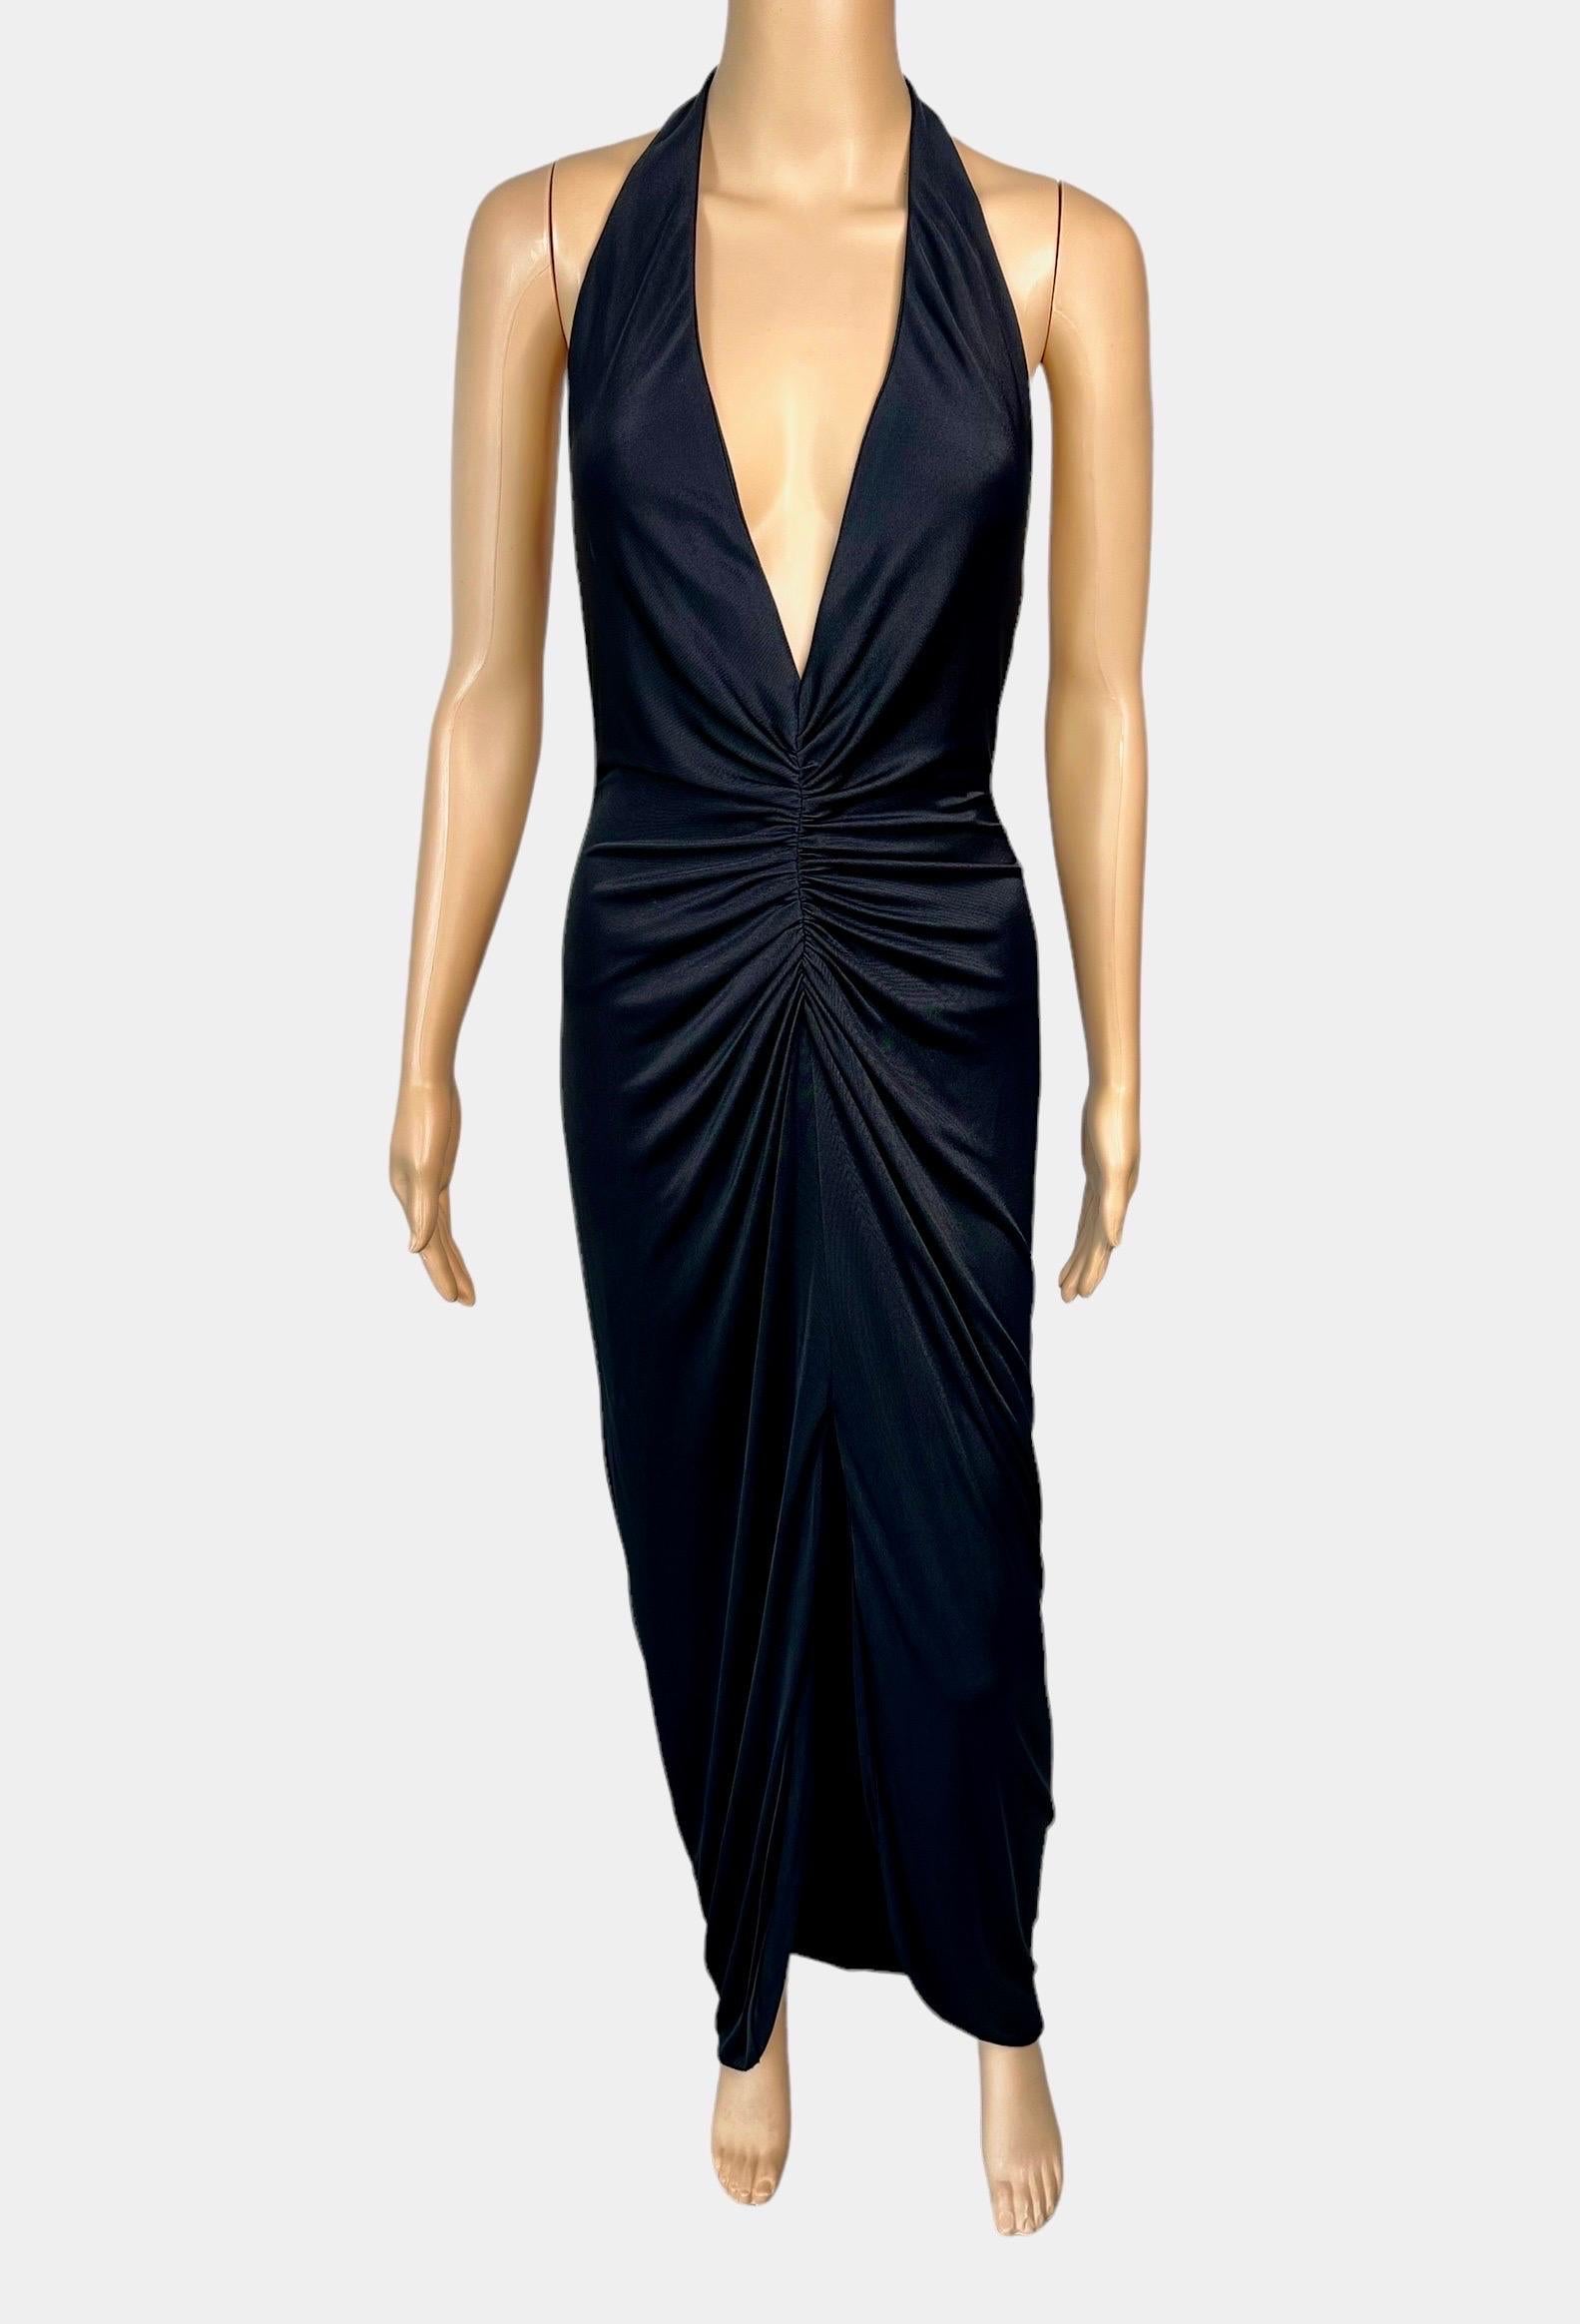 Versace S/S 2005 Runway Plunging Hi-Low Ruched Open Back Evening Dress Gown 5